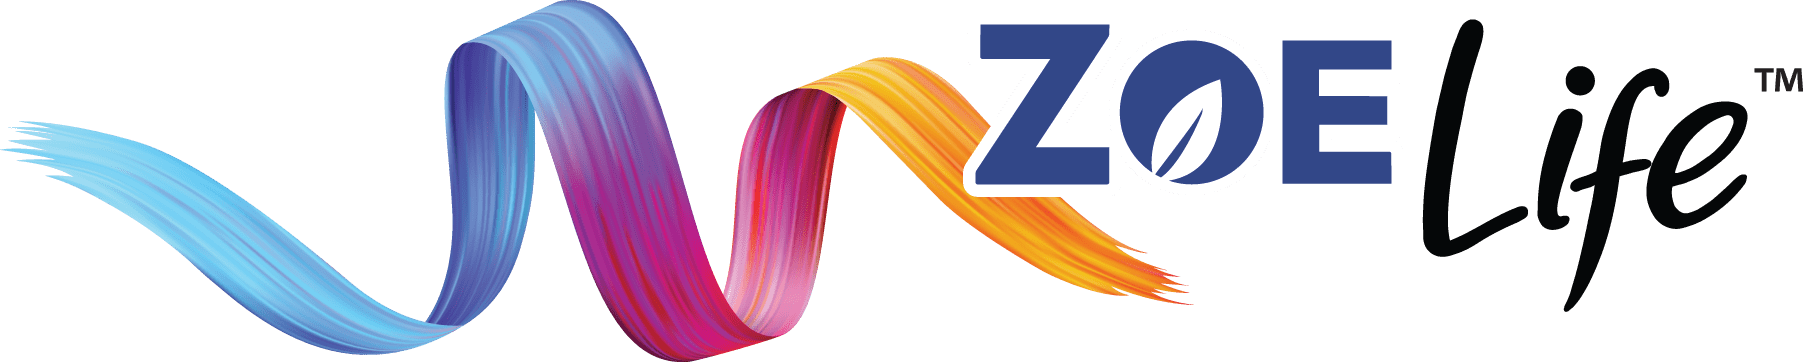 ZoeLife logo clear background